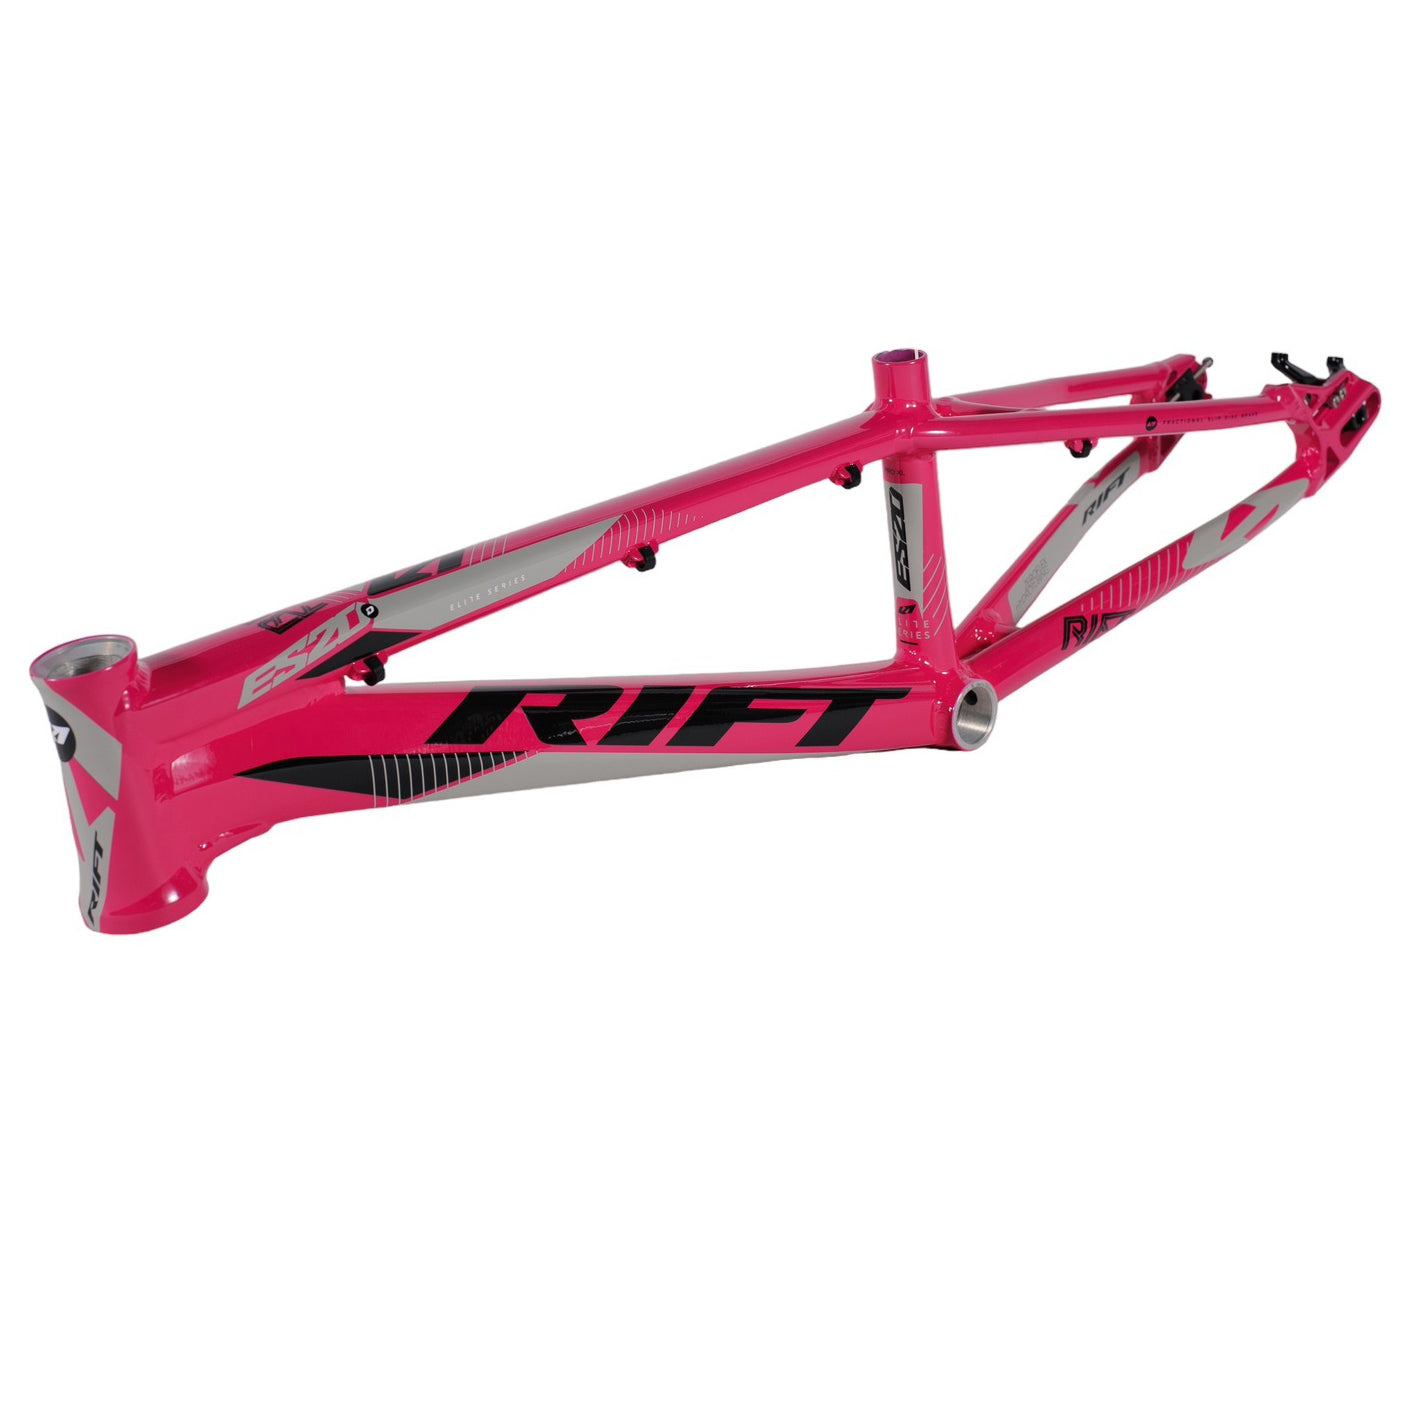 An Rift ES20 Frame Expert XL in pink on a white background.